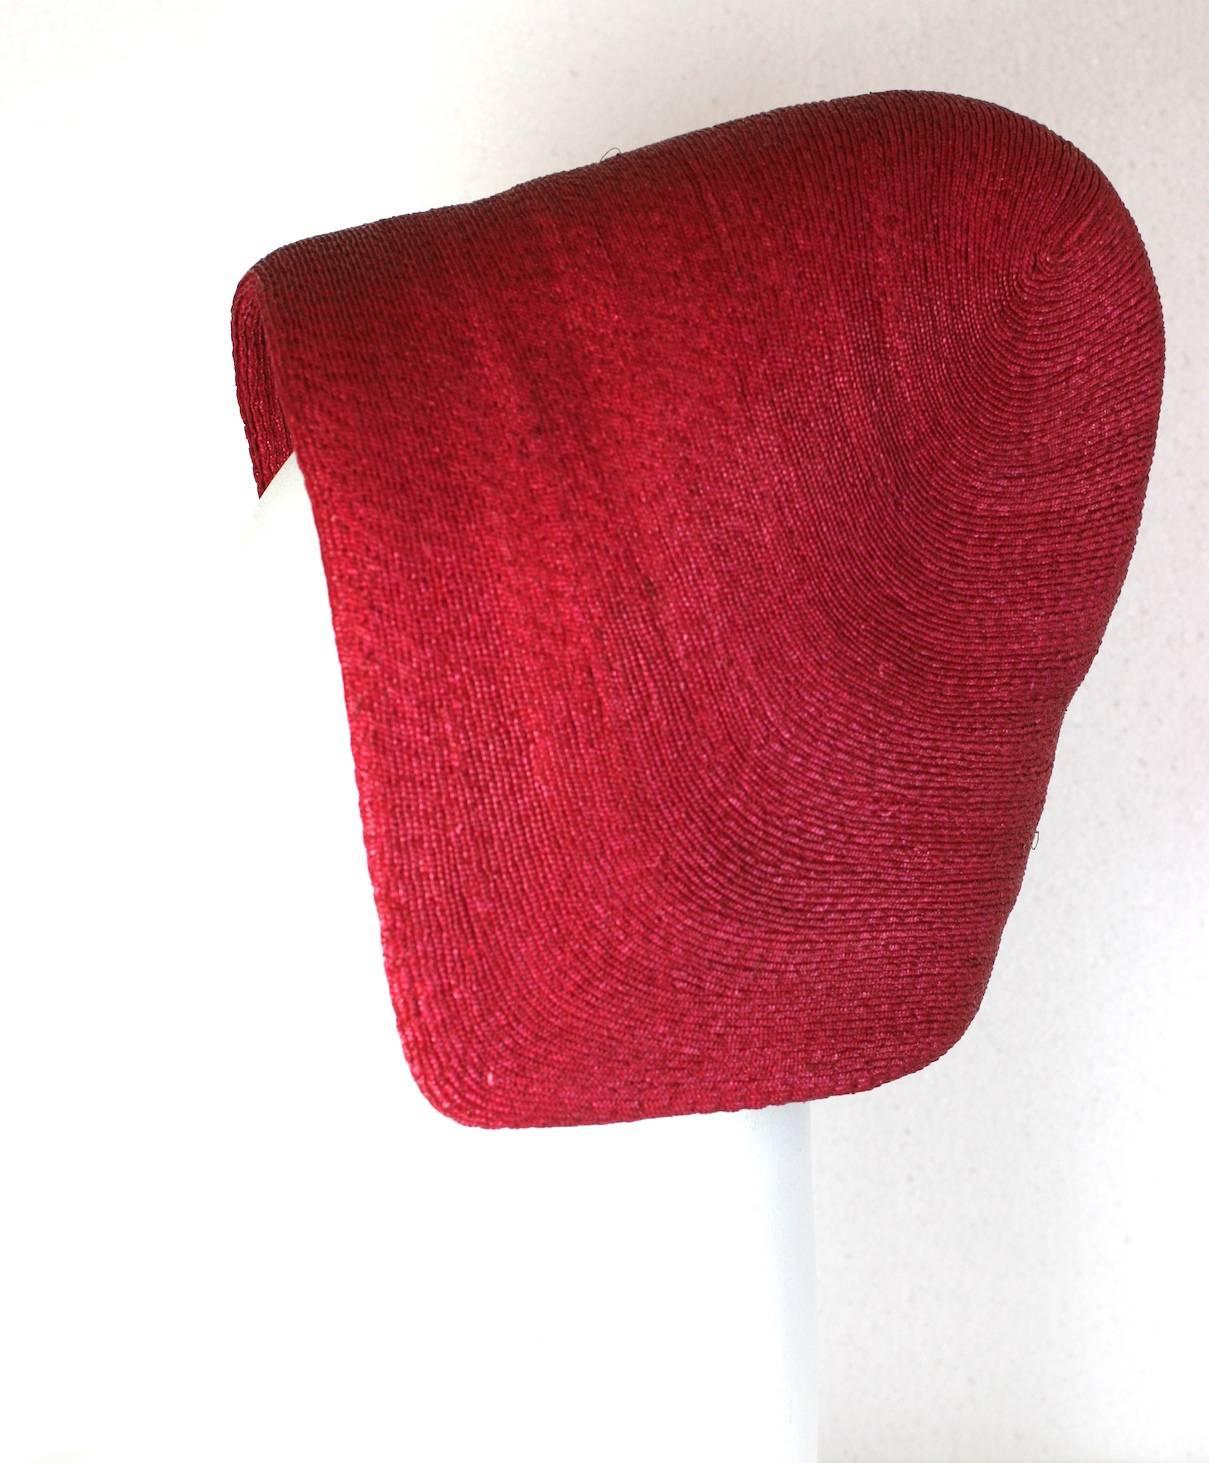 Adolfo French Straw Early Bonnet in bright cherry red. Unusual design evocative of Parisian 1960's Space Age Shapes. 
Excellent condition. 
Although Adolfo established his reputation in America as a designer for the ladies who lunched, he acquired